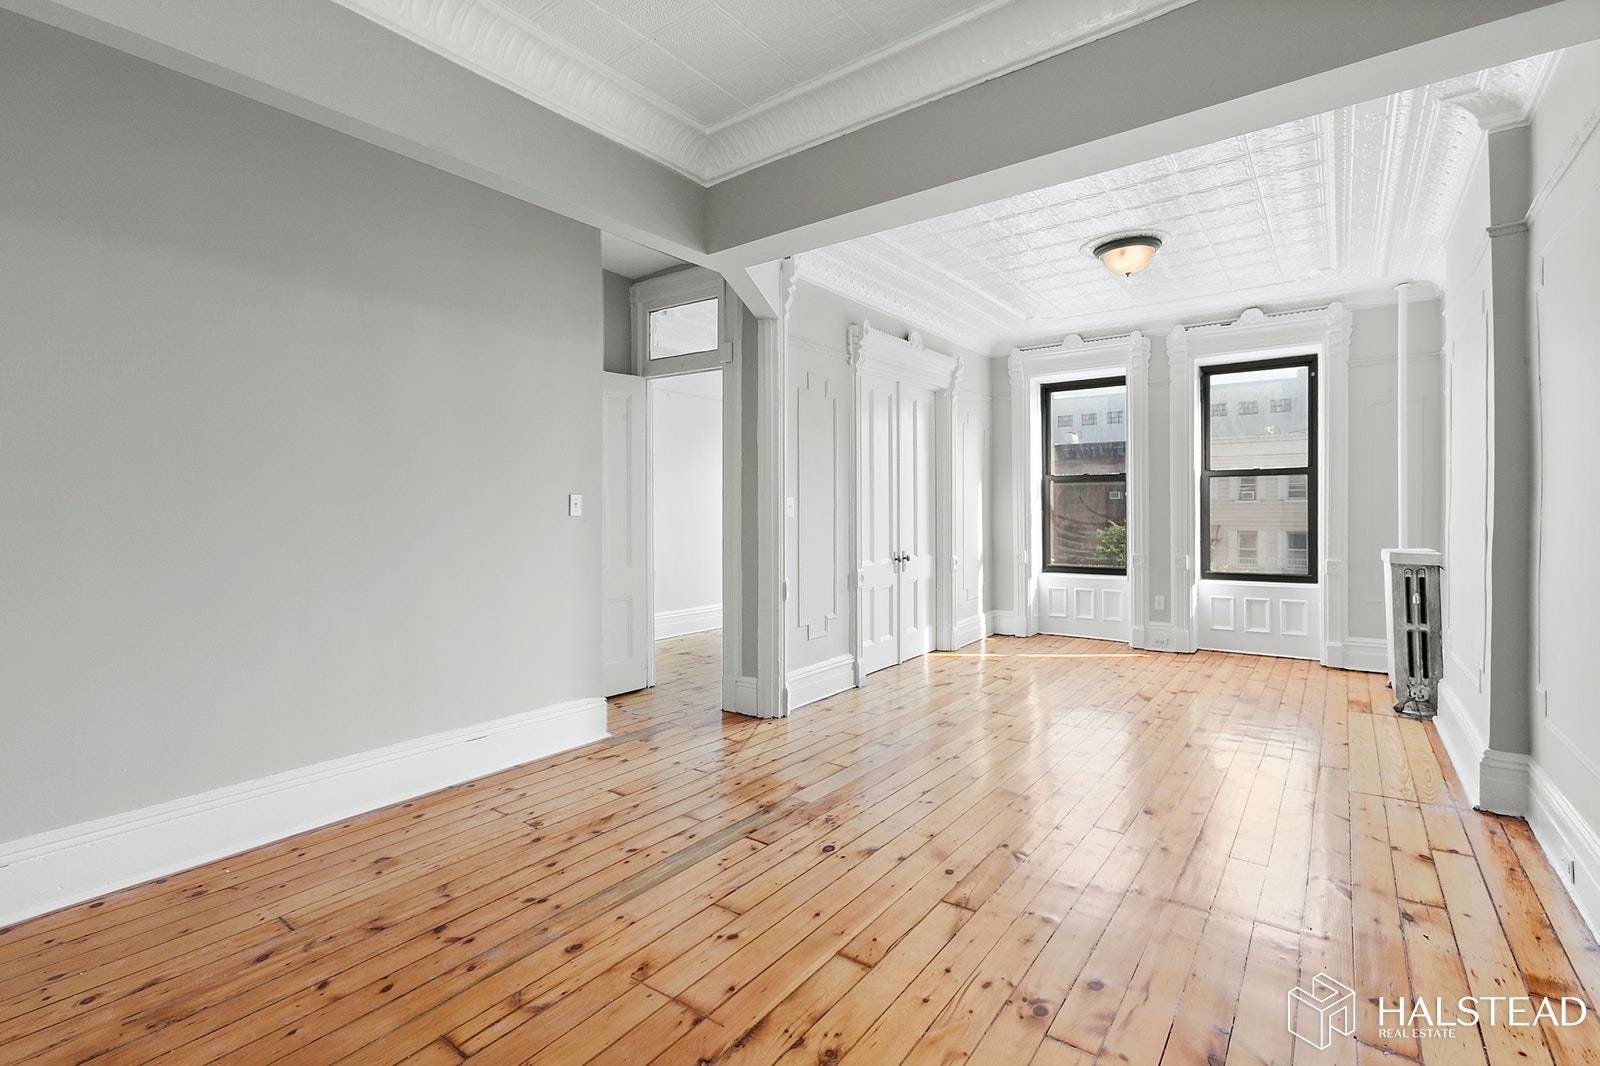 We are pleased to present this beautifully renovated 2BR floor thru.